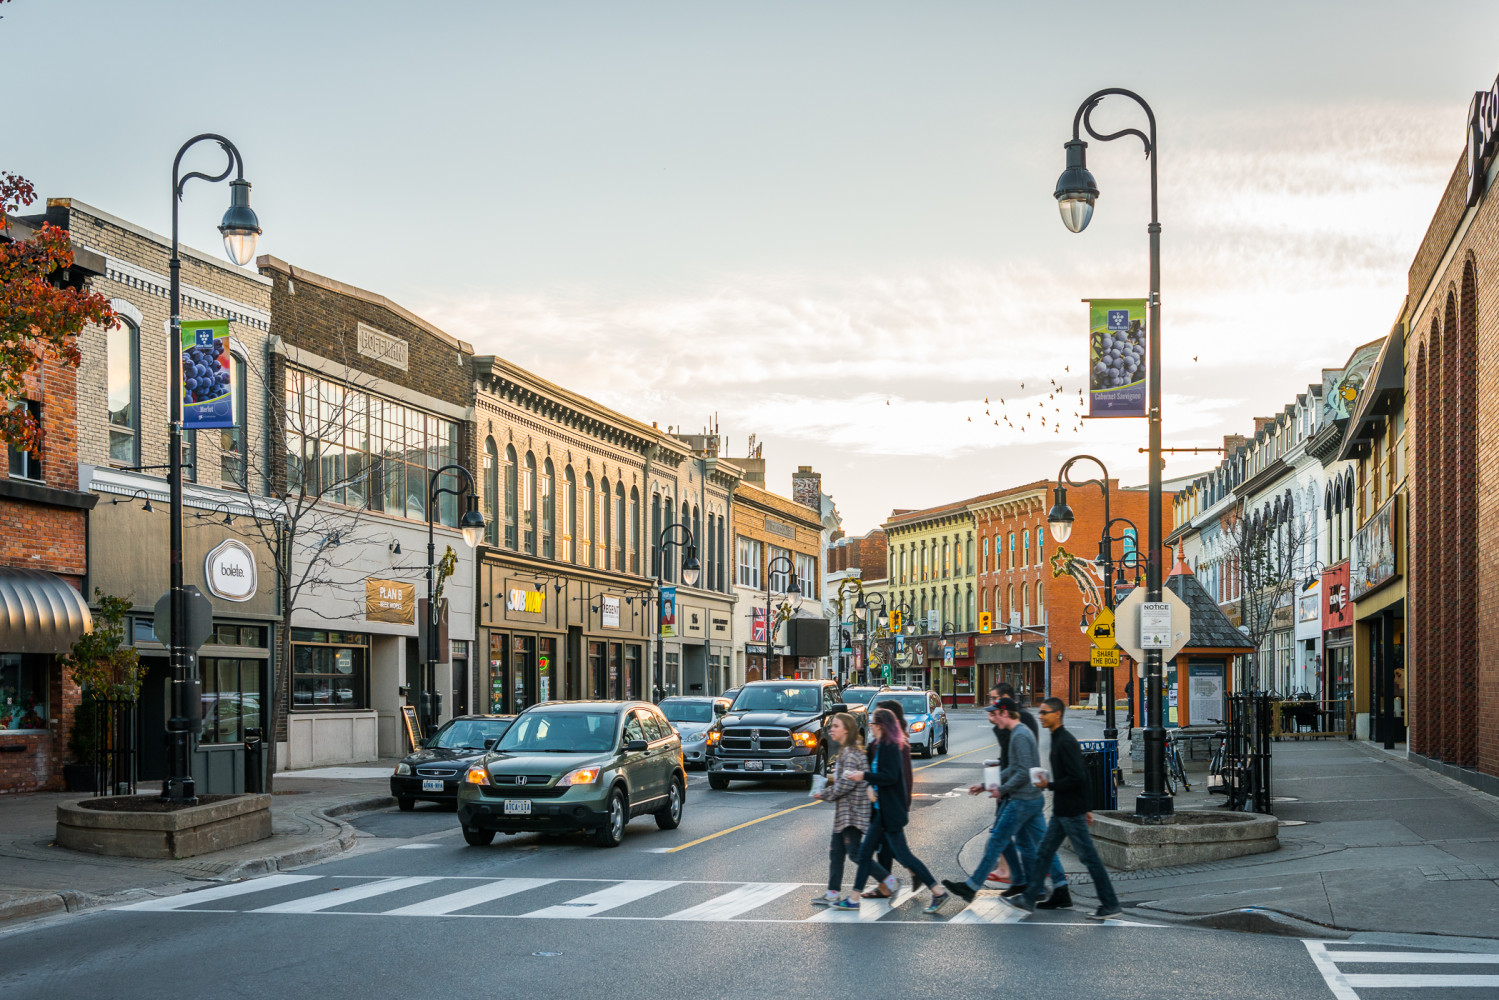 St. Catharines strengthens emissions reductions targets after surpassing previous goals